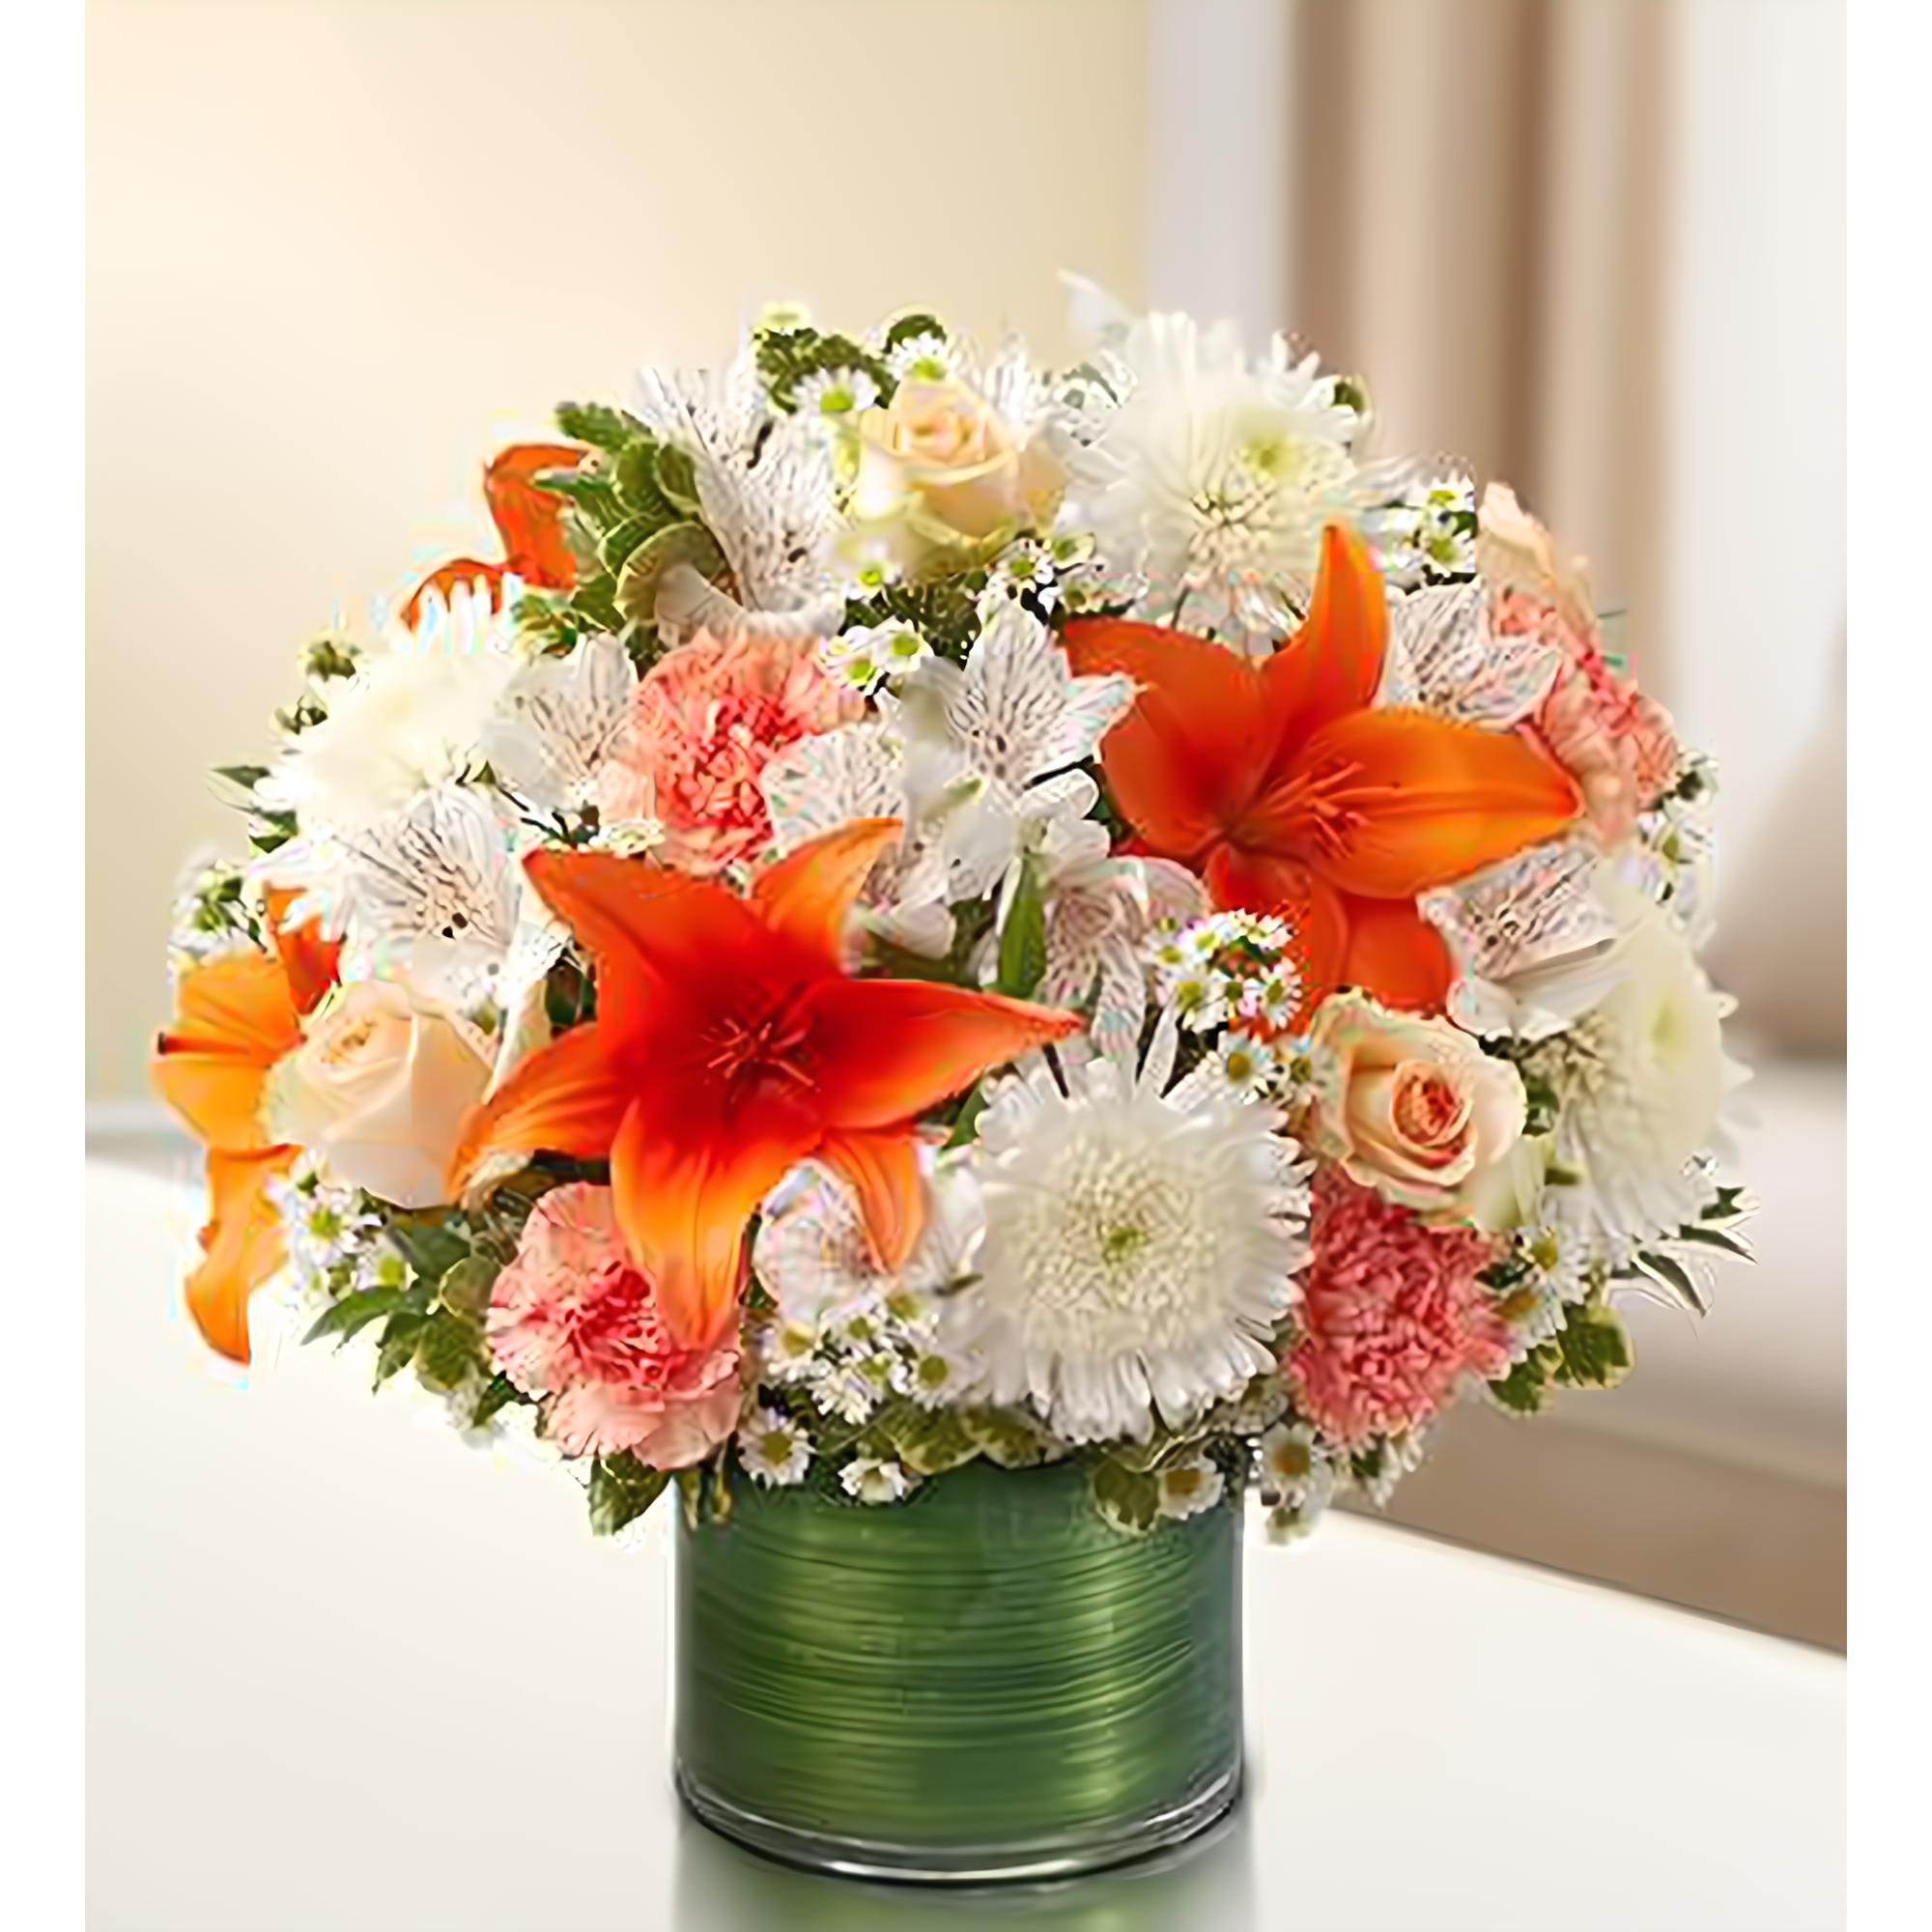 NYC Flower Delivery - Cherished Memories - Peach, Orange and White - Funeral > Vase Arrangements